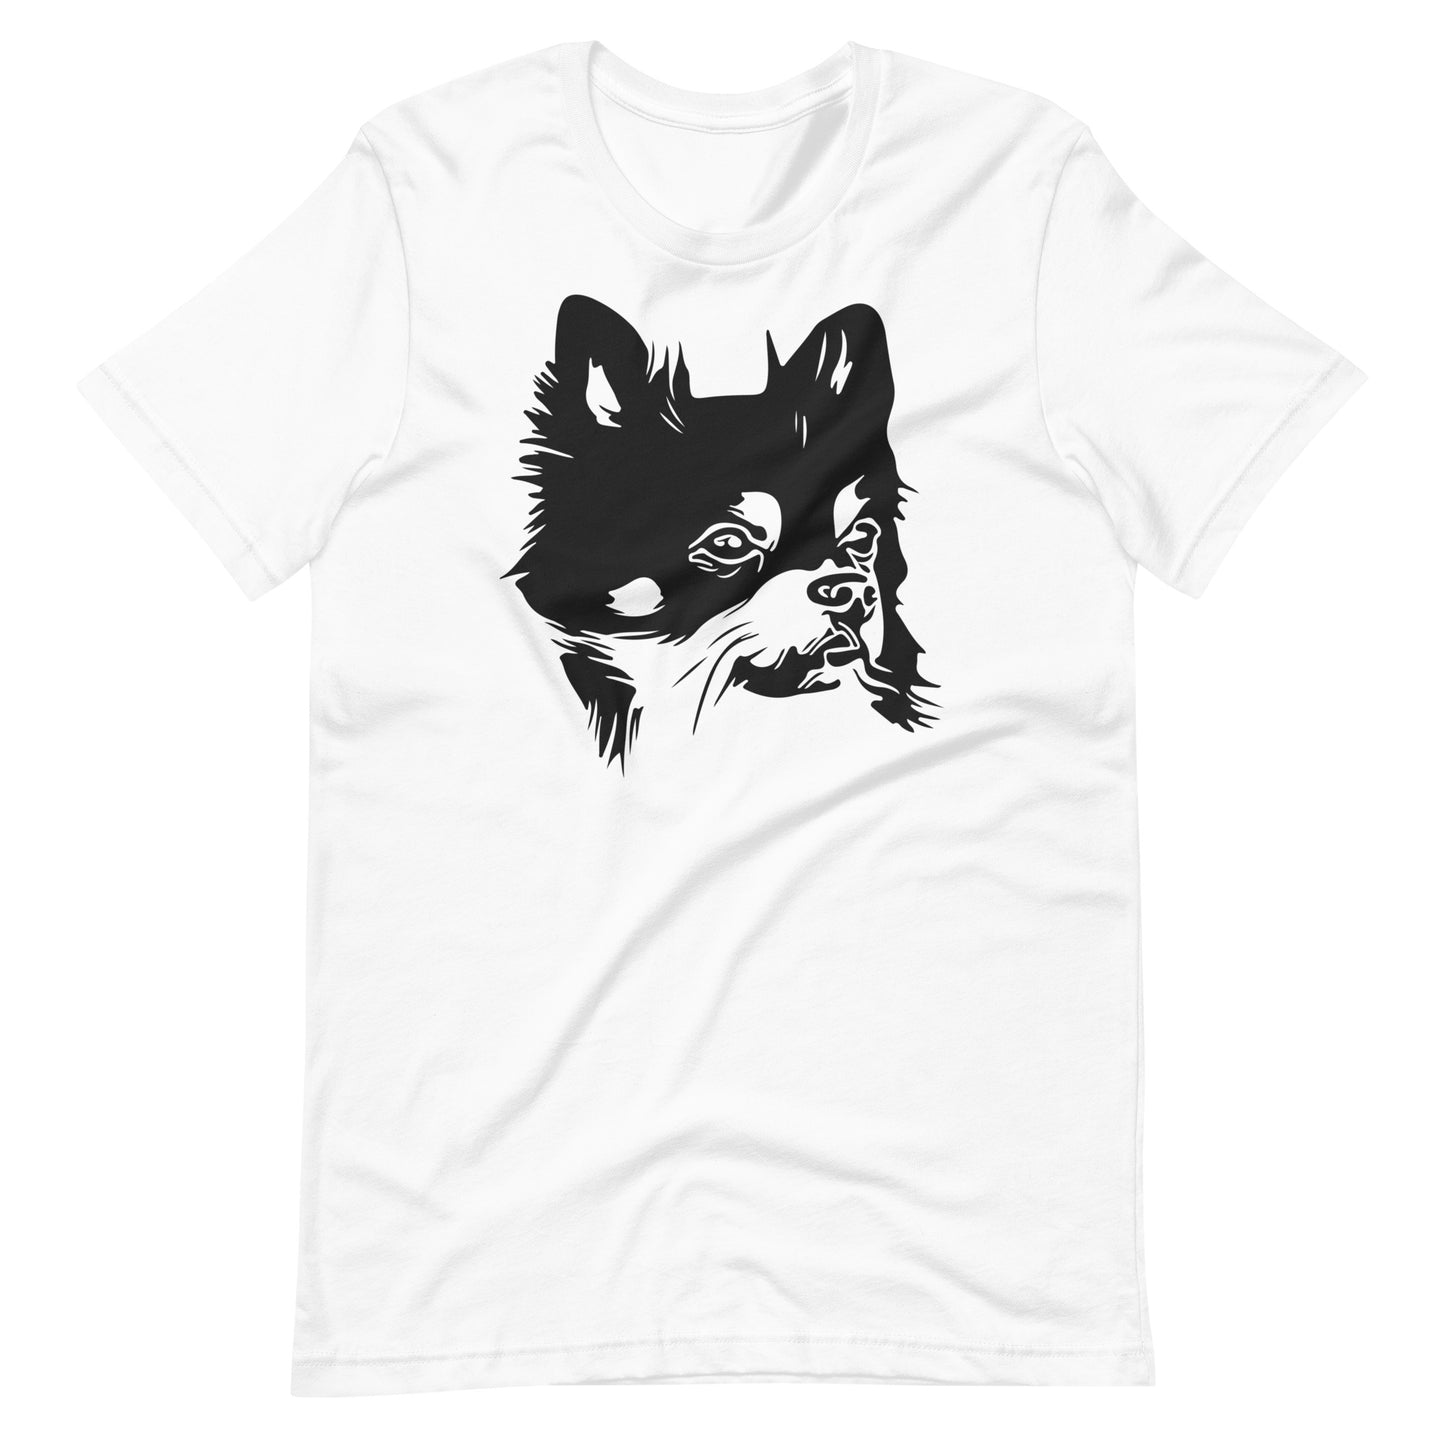 Black Chihuahua face silhouette looks sideways on unisex white t-shirt